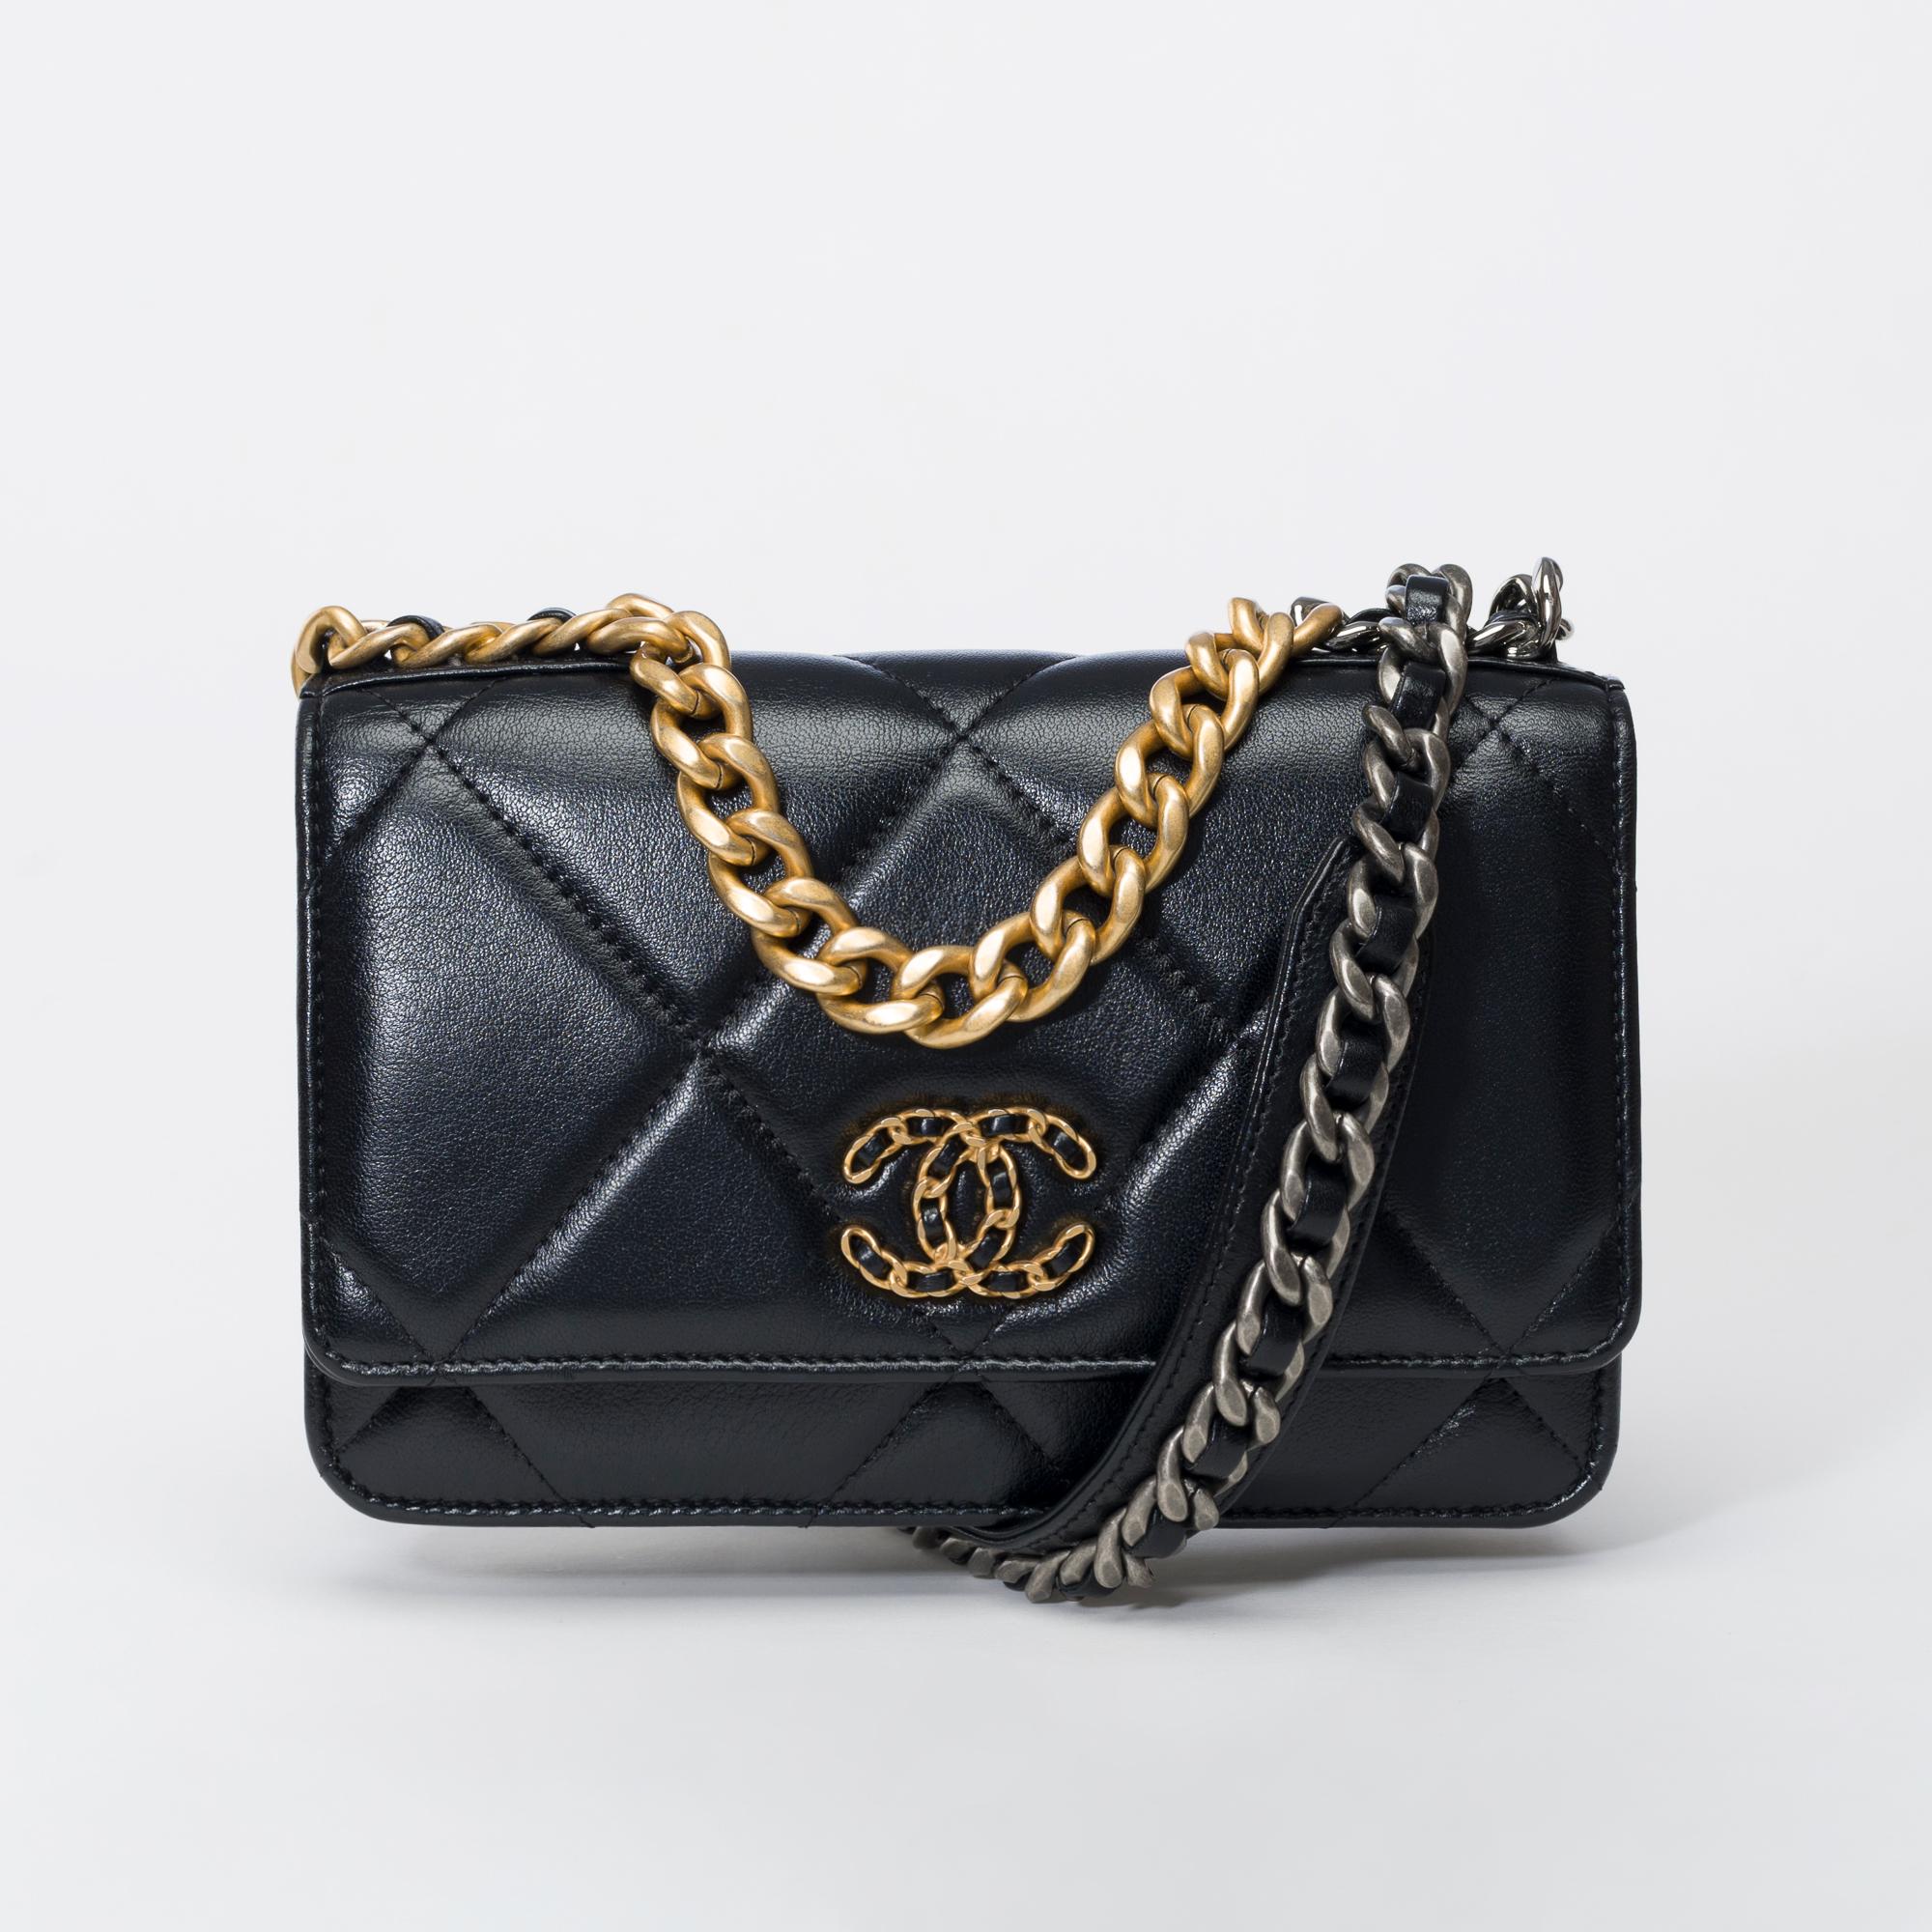 Amazing Chanel Wallet On Chain (WOC) 19 shoulder bag in black quilted lambskin leather, matte gold metal hardware, a matte gold metal handle, a silver and matte gold chain handle interlaced with black leather for hand or shoulder or crossbody